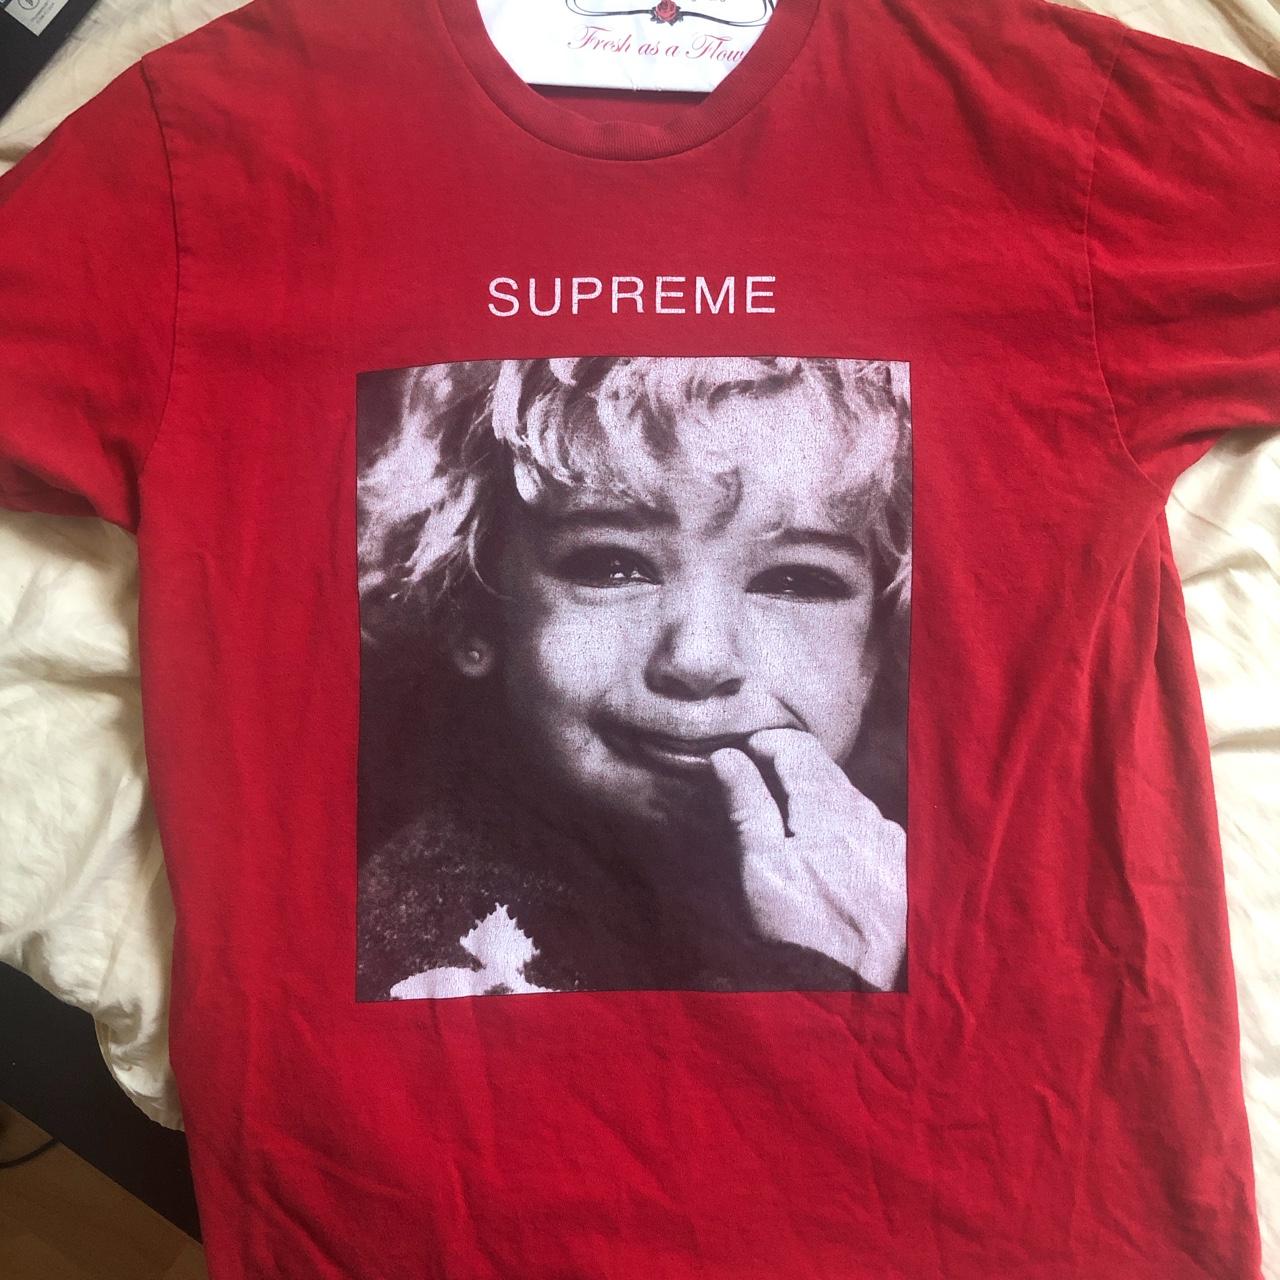 Supreme Cry Baby Tee from 2015 catalog #Supreme... - Depop